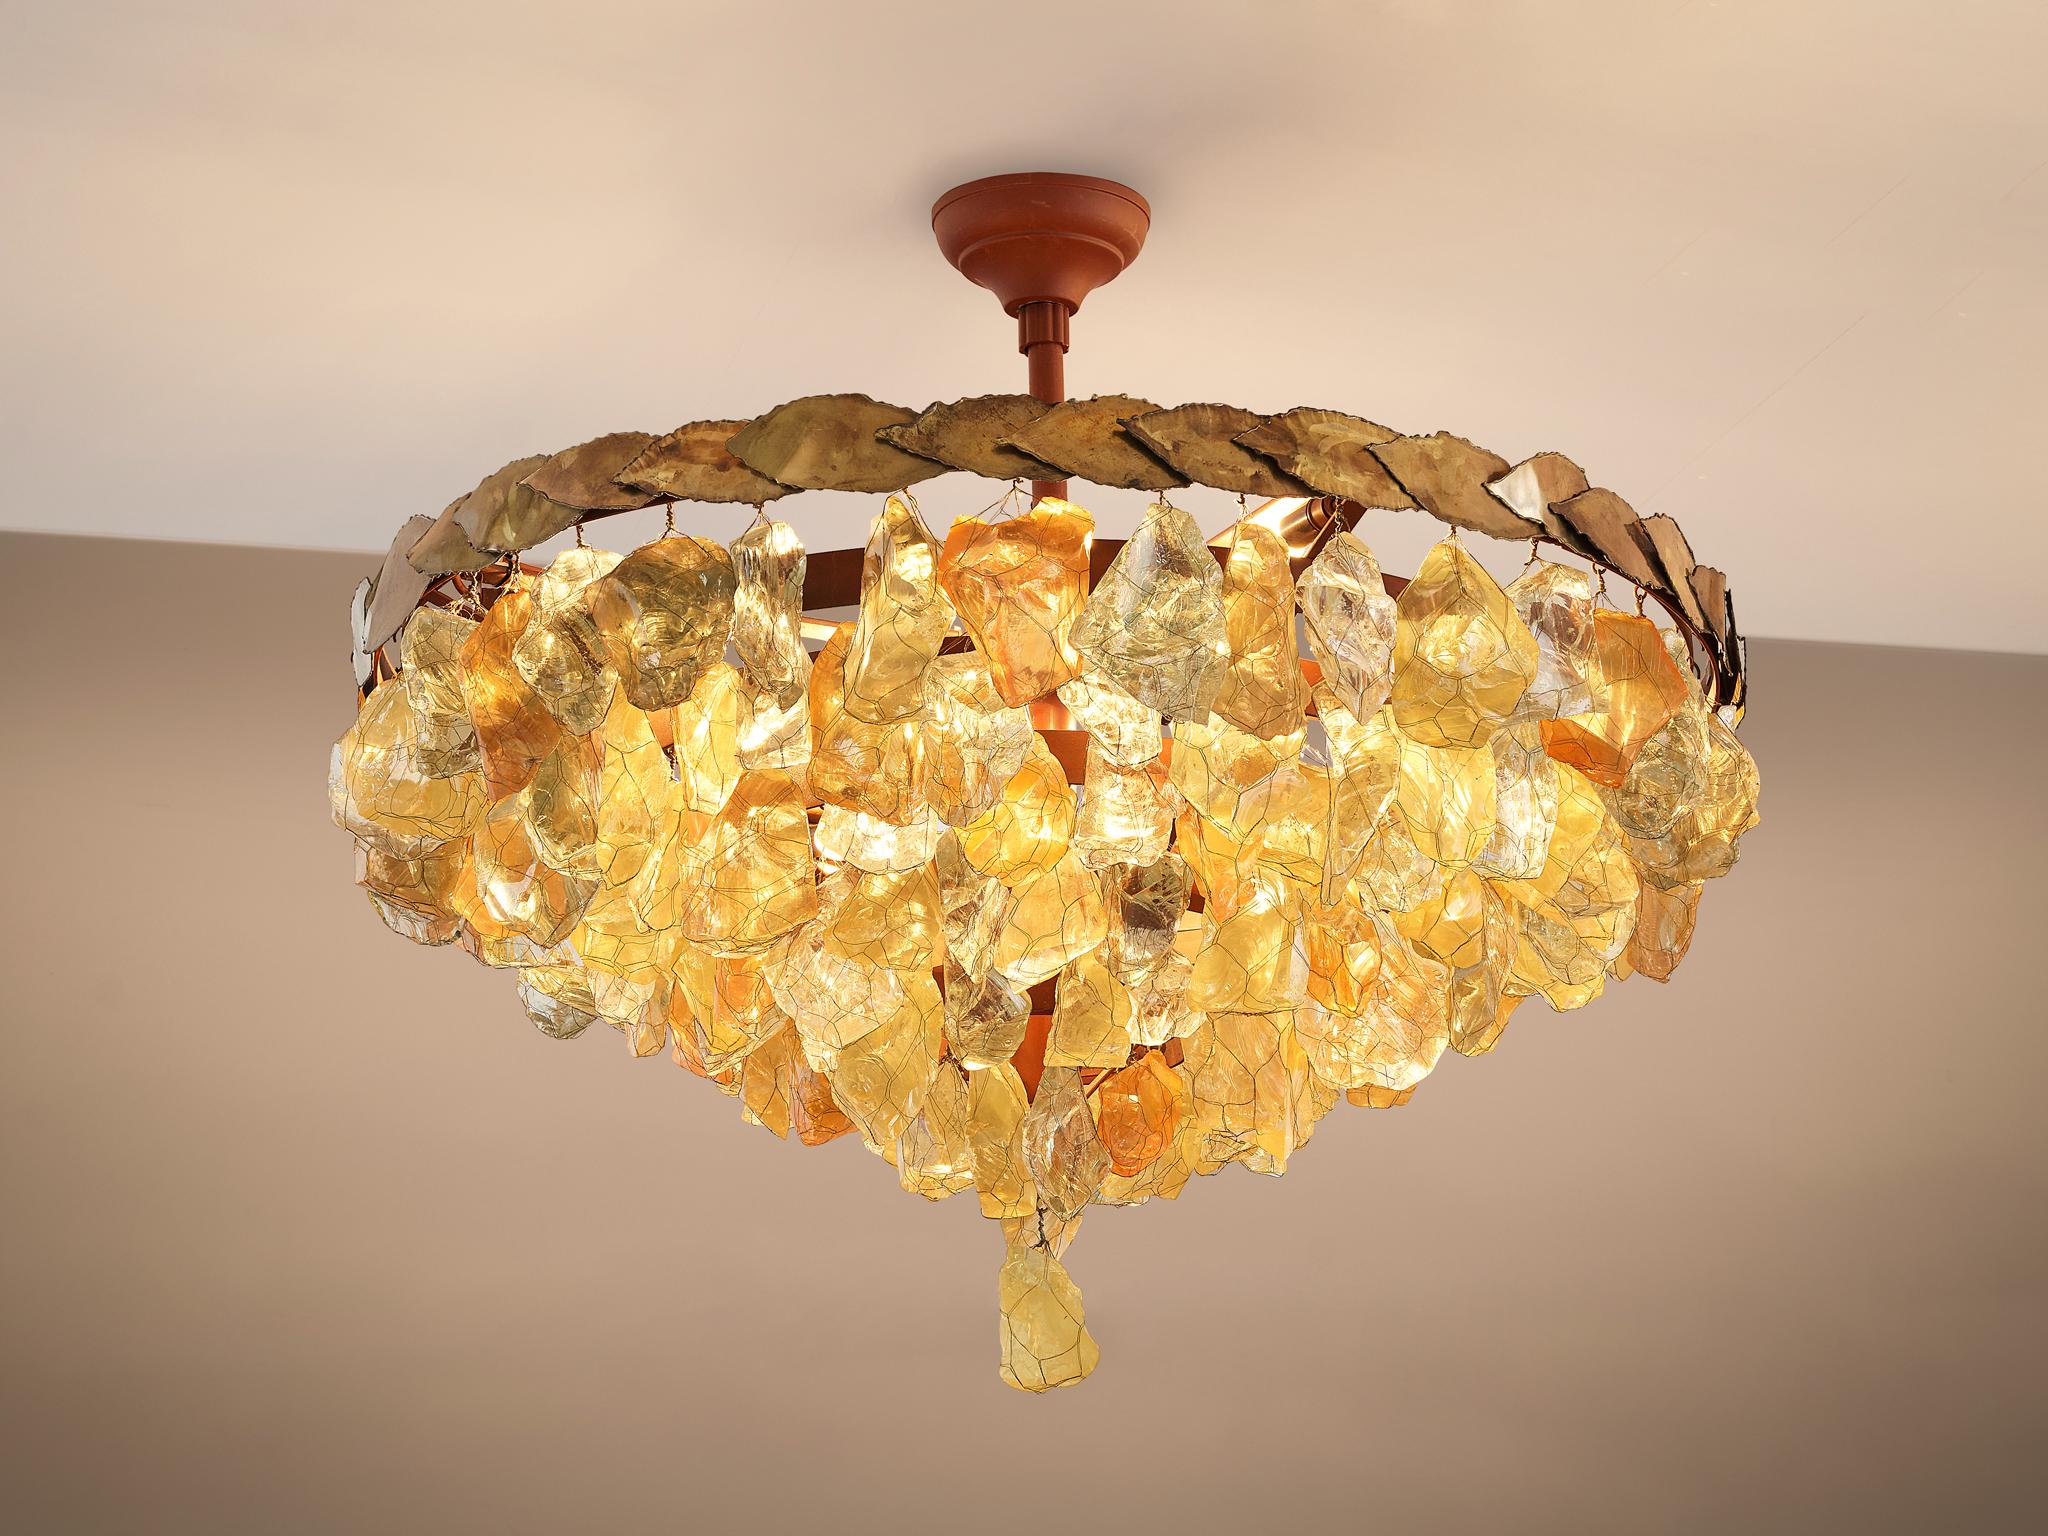 Chandelier, glass, brass, metal, France, 1950s.

This pendant features a diversity of different forms of and colors of rough glass chunks. The chunks feature autumnal colors. The variety of organic, asymmetrical glass elements is held together with